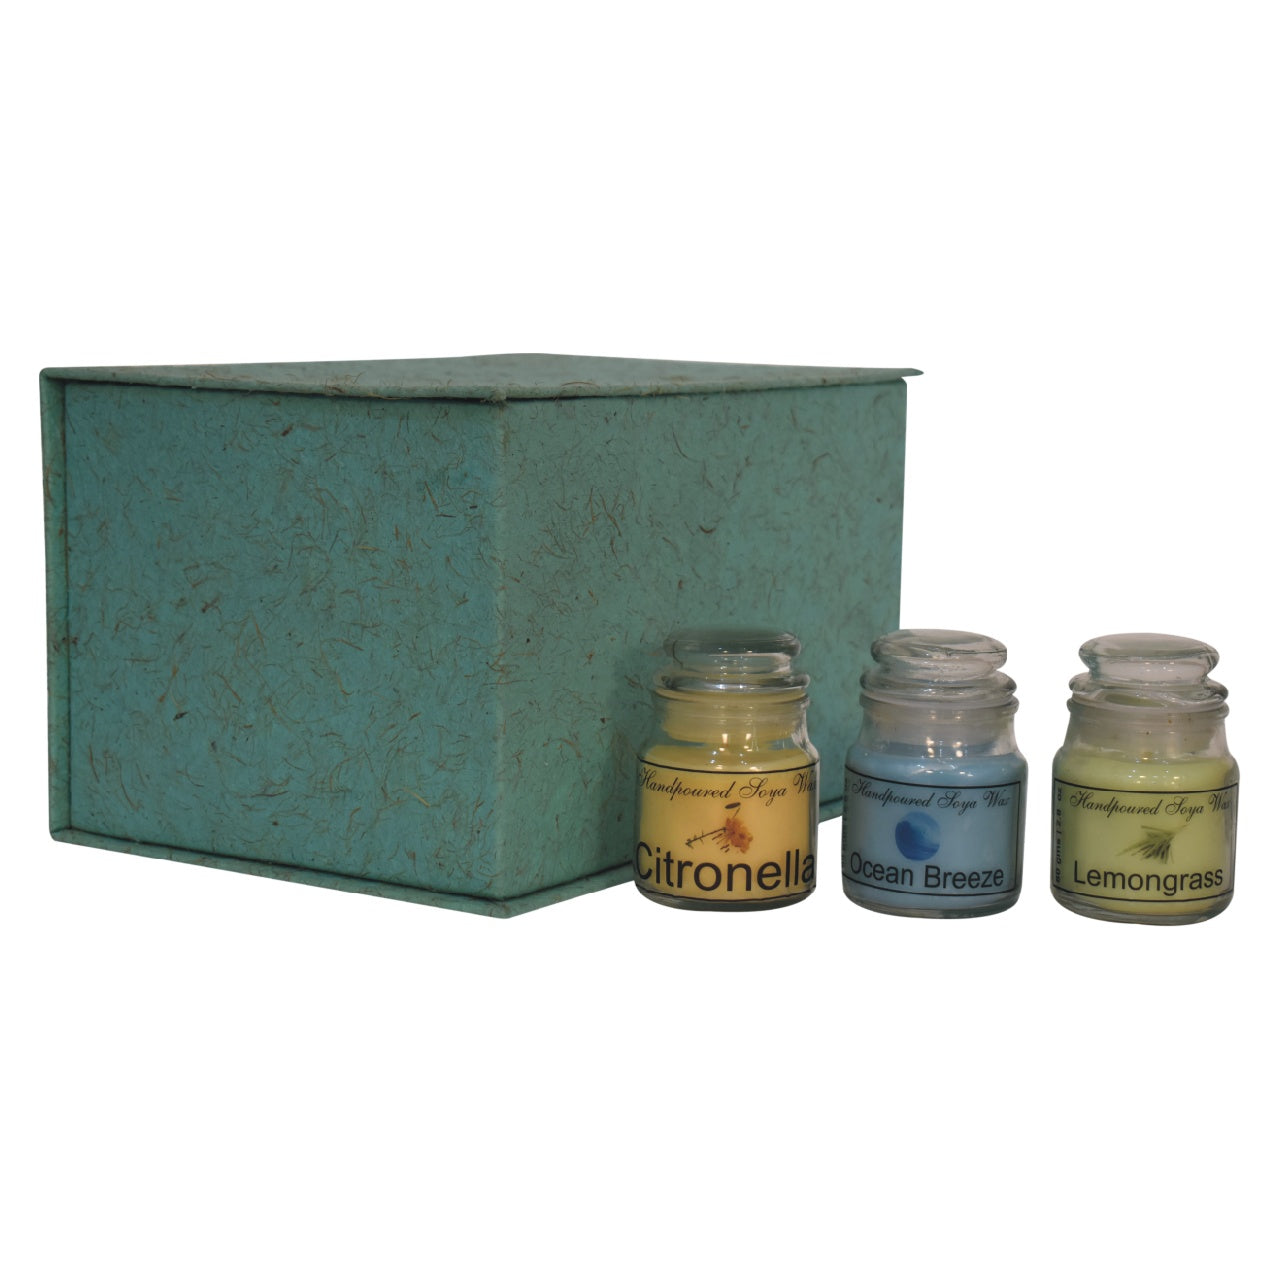 Hourglass Candle Set of 3 (Citronella, Ocean Breeze, Lemongrass) - Red Ross Retail-Furniture Specialists 